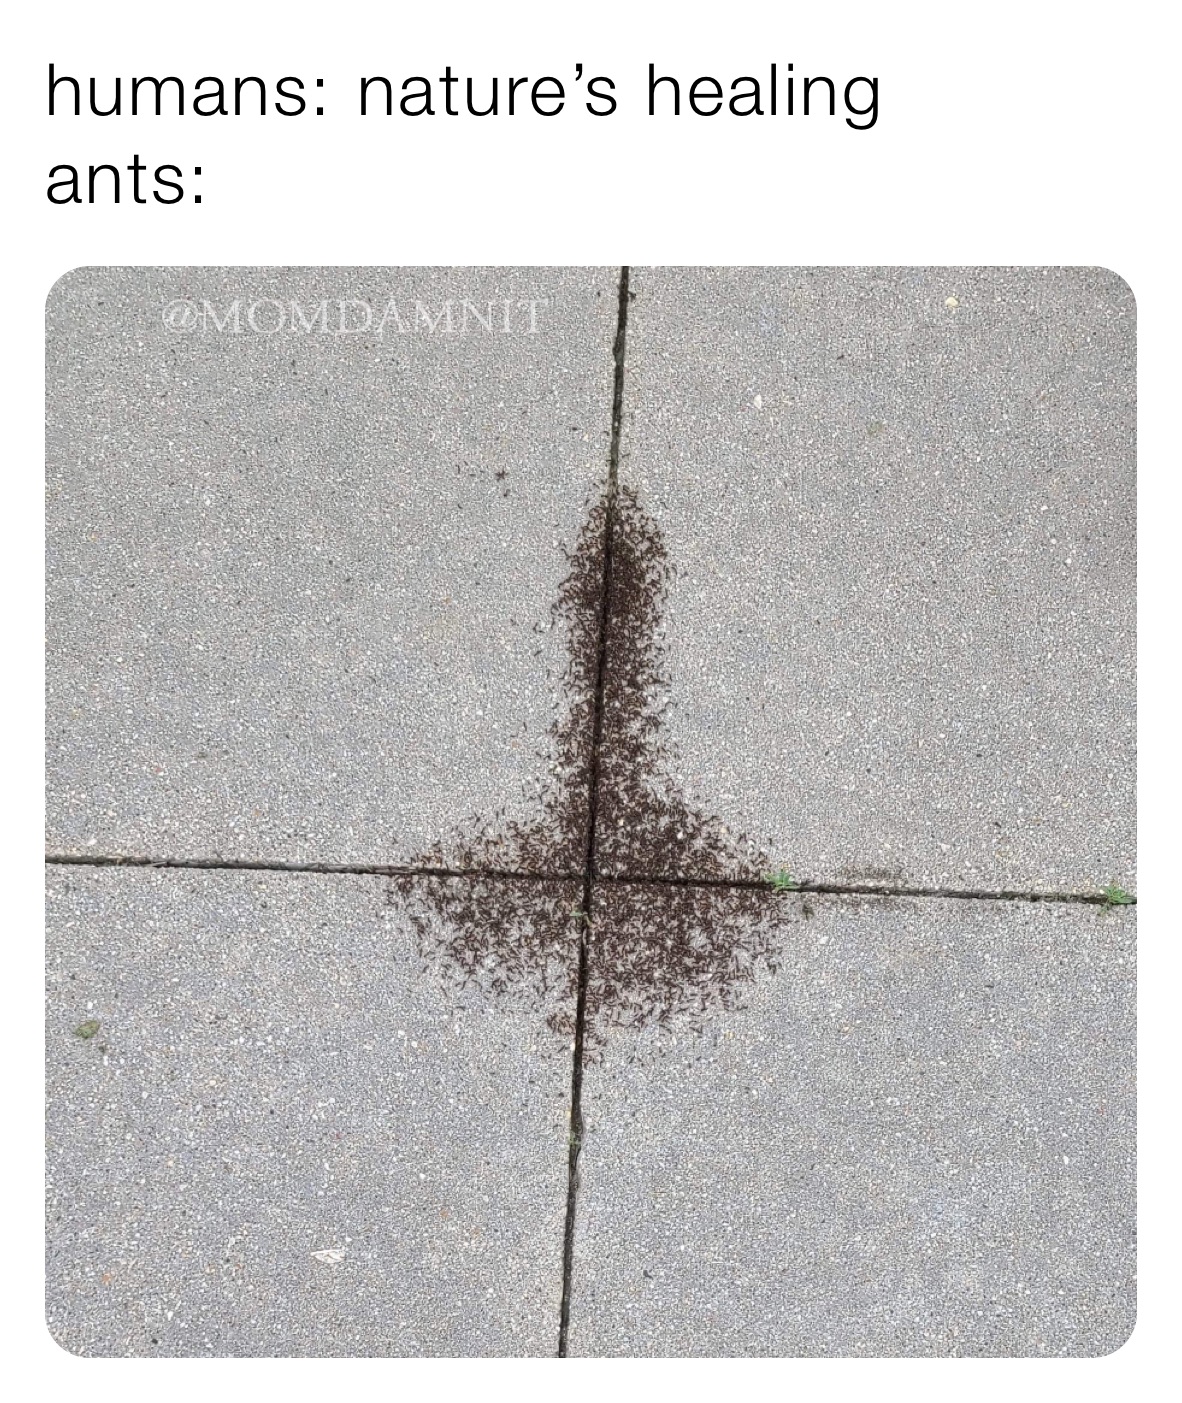 humans: nature’s healing
ants: 